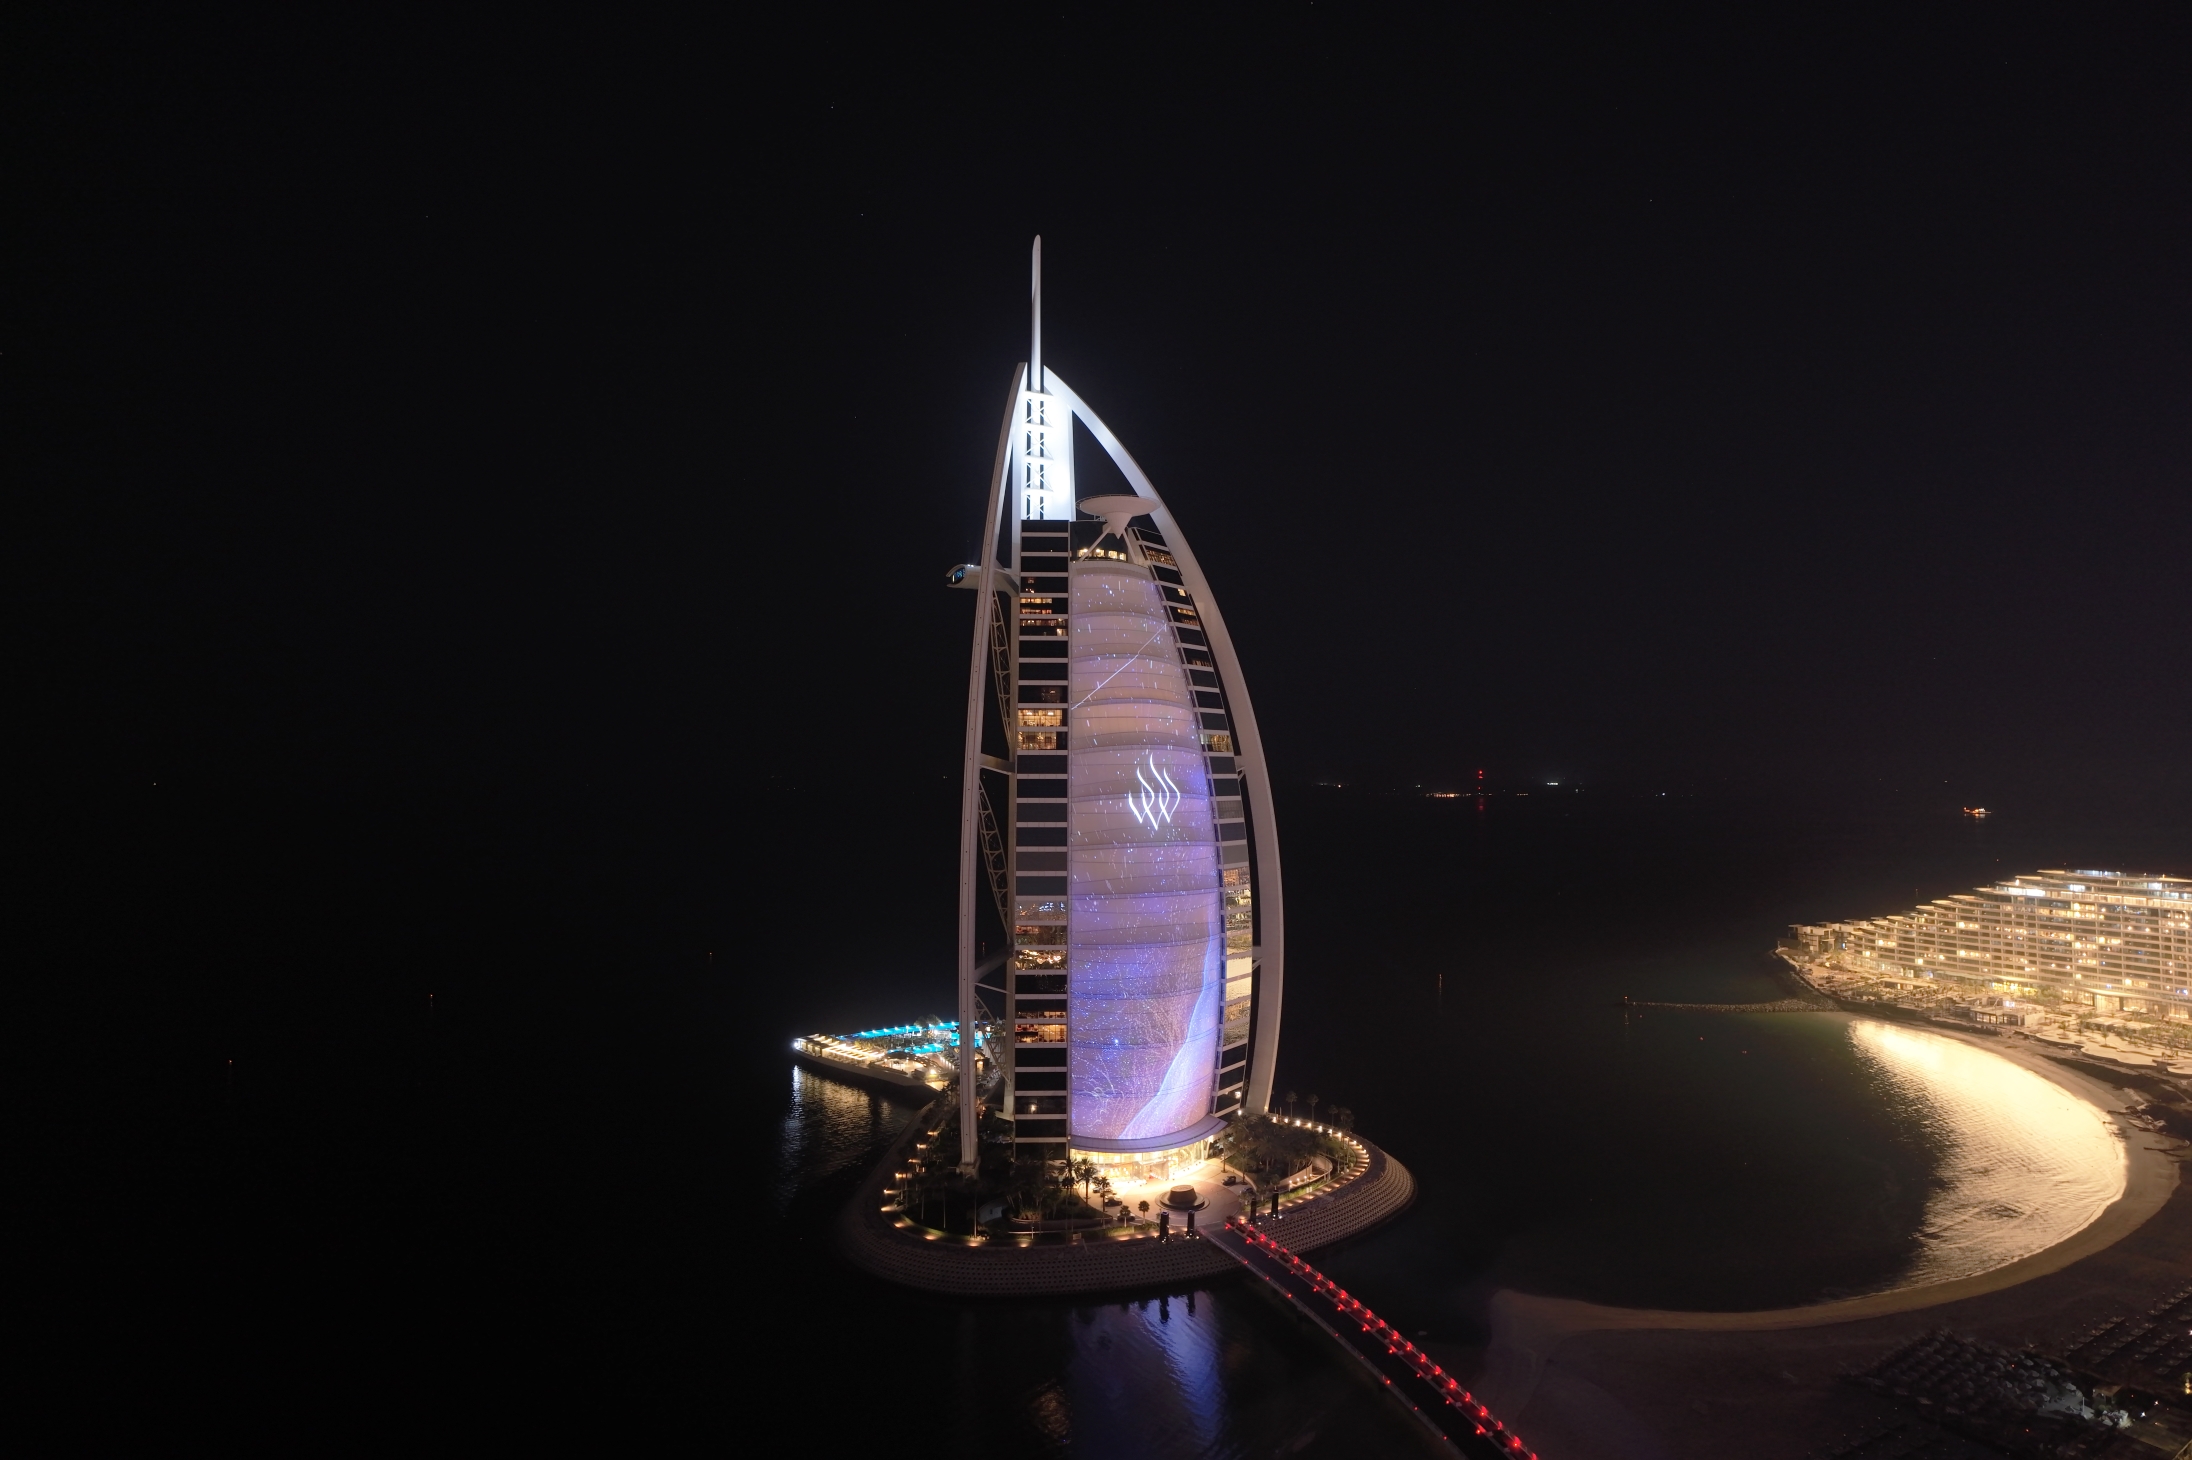 With plans to double portfolio by 2030, Jumeirah unveils new brand identity